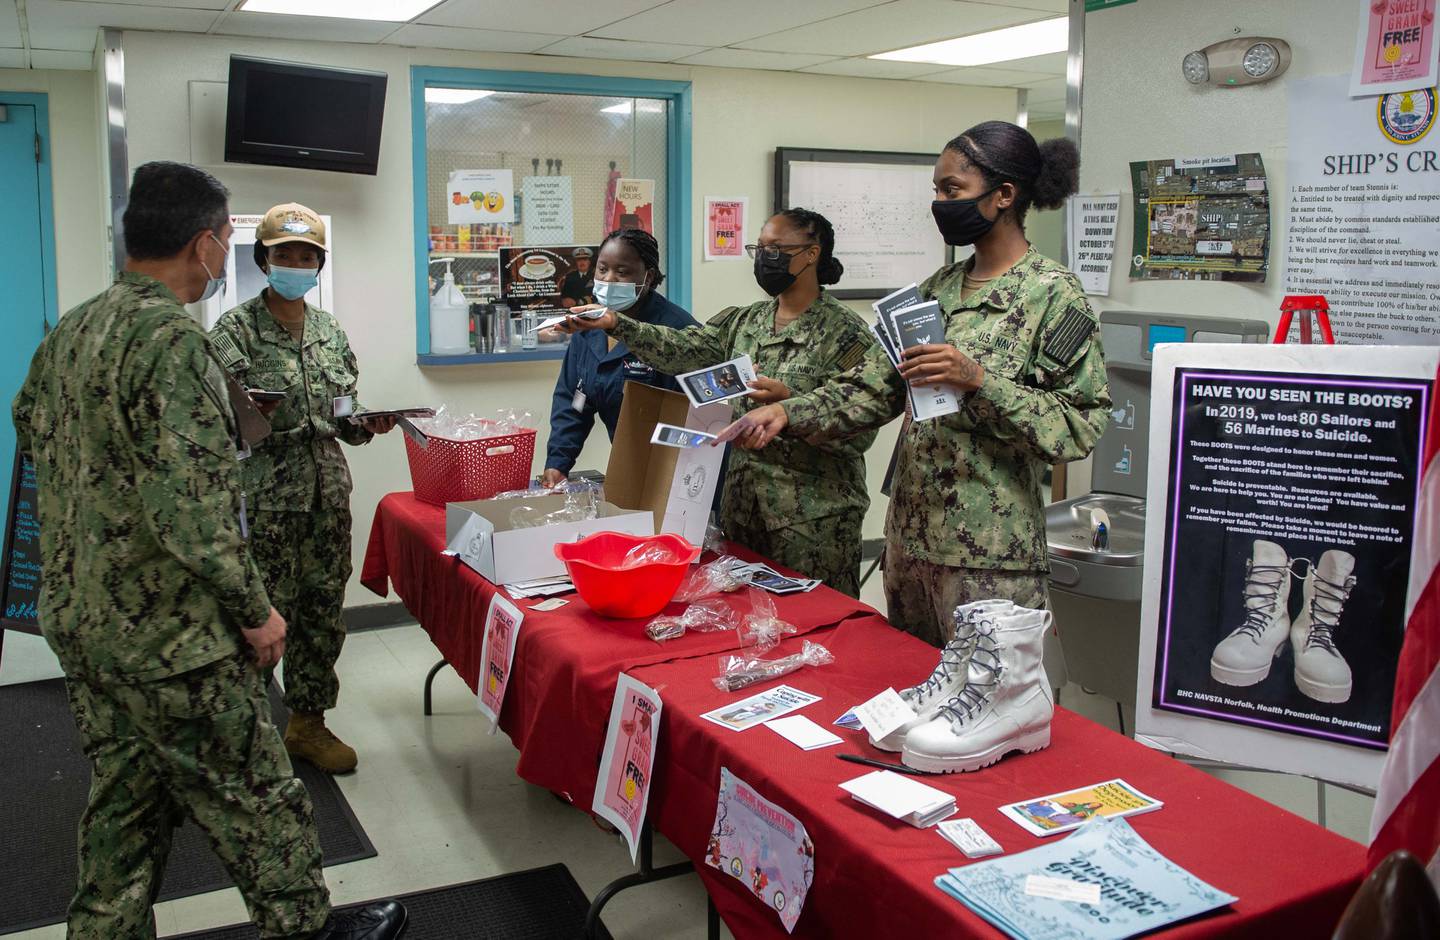 Navy sailors assigned to the aircraft carrier John C. Stennis distribute pamphlets to raise awareness for suicide prevention in Newport News, Virginia, Sep. 30, 2021.